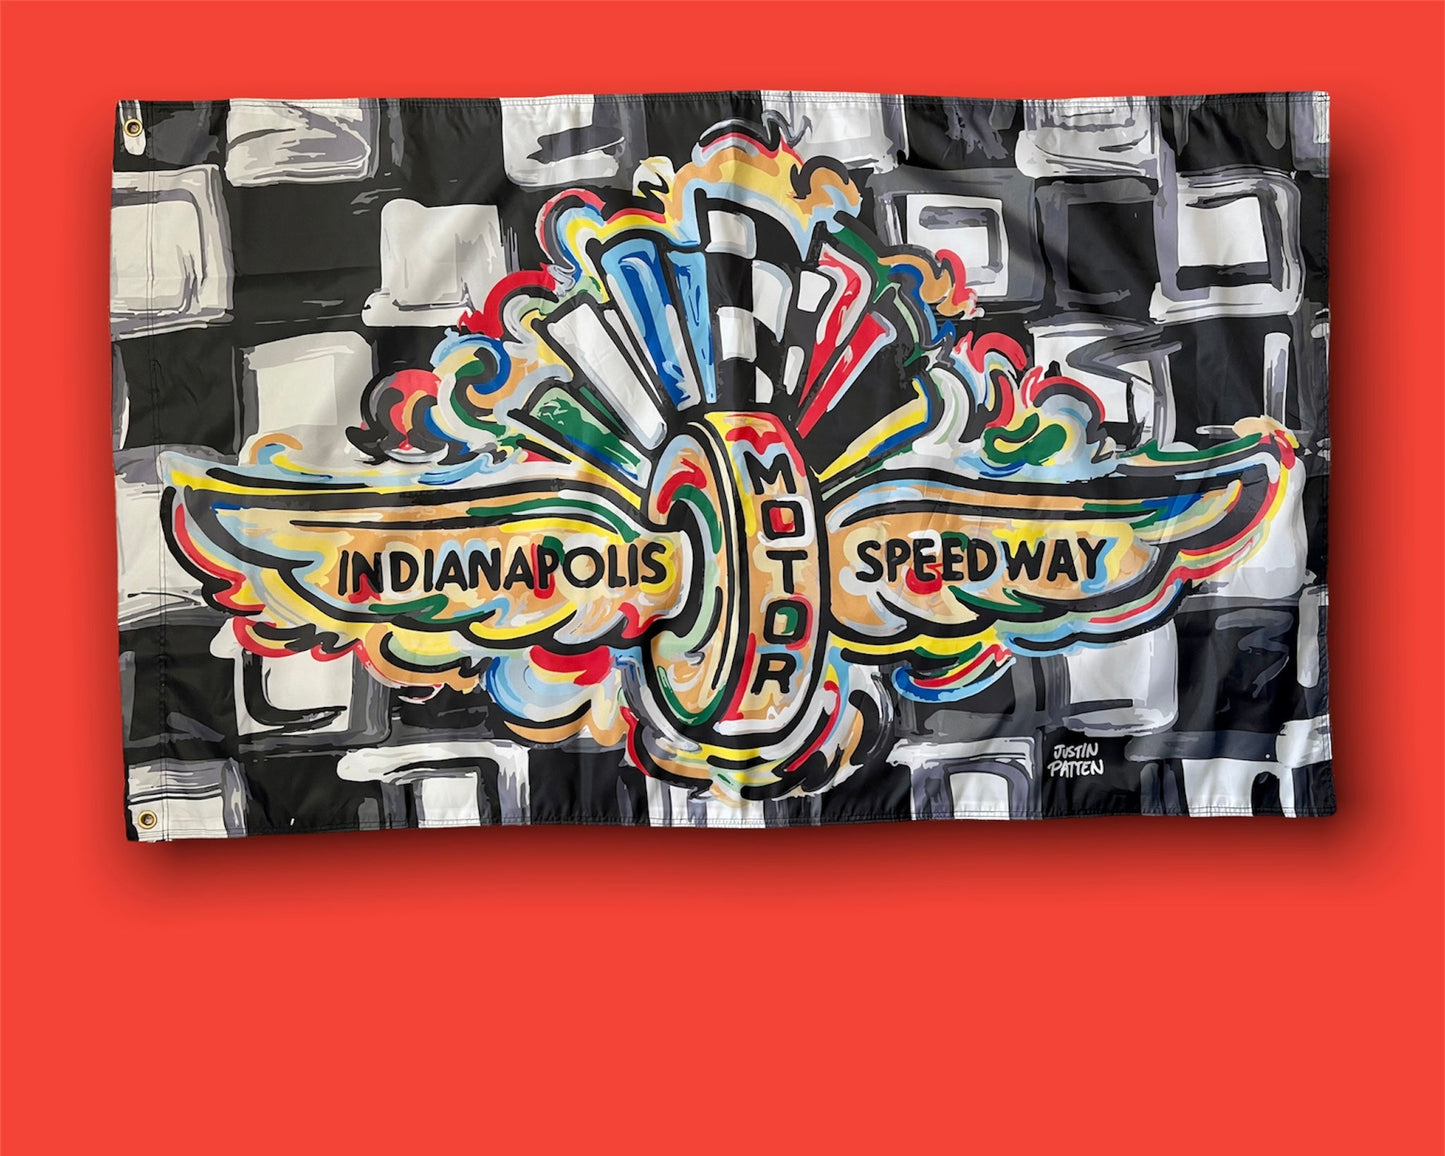 Indianapolis Motor Speedway Wing and Wheel Banner (5’x3’ ft.) by Justin Patten